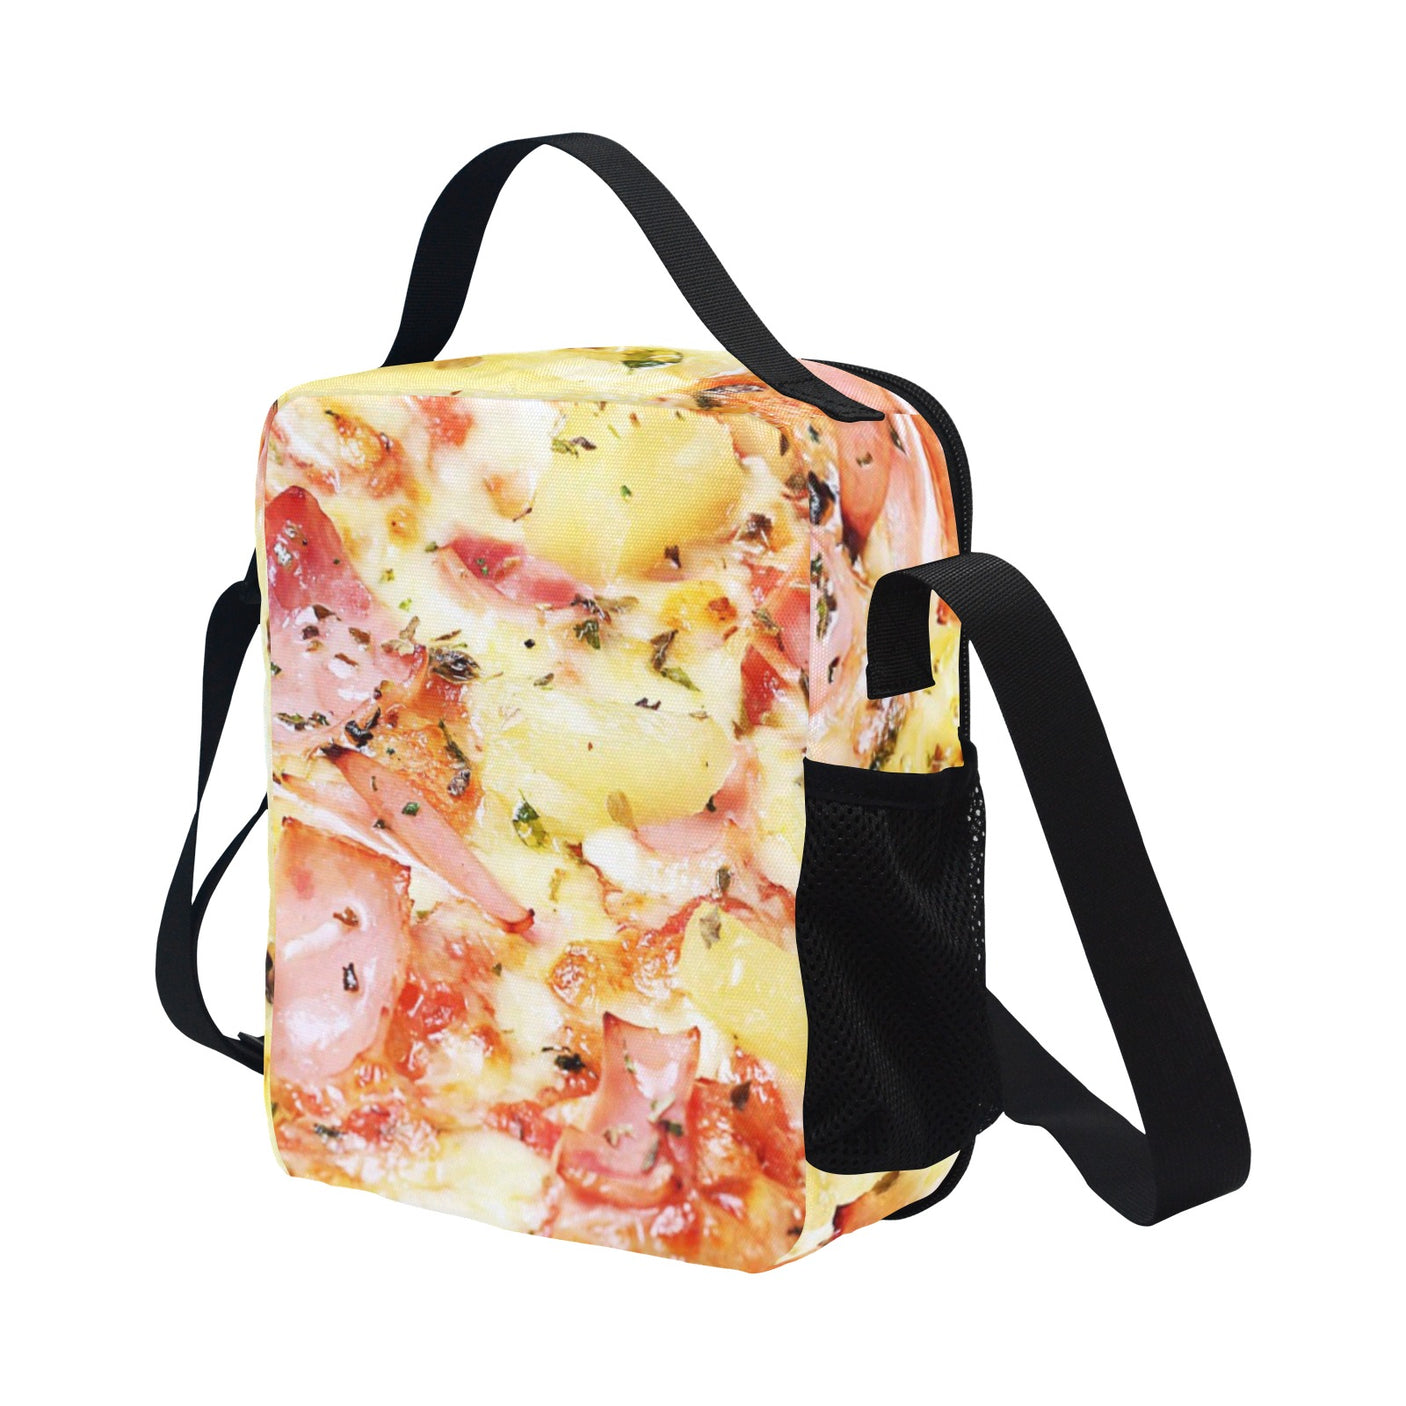 Pineapple Pizza Lunch Box Bag